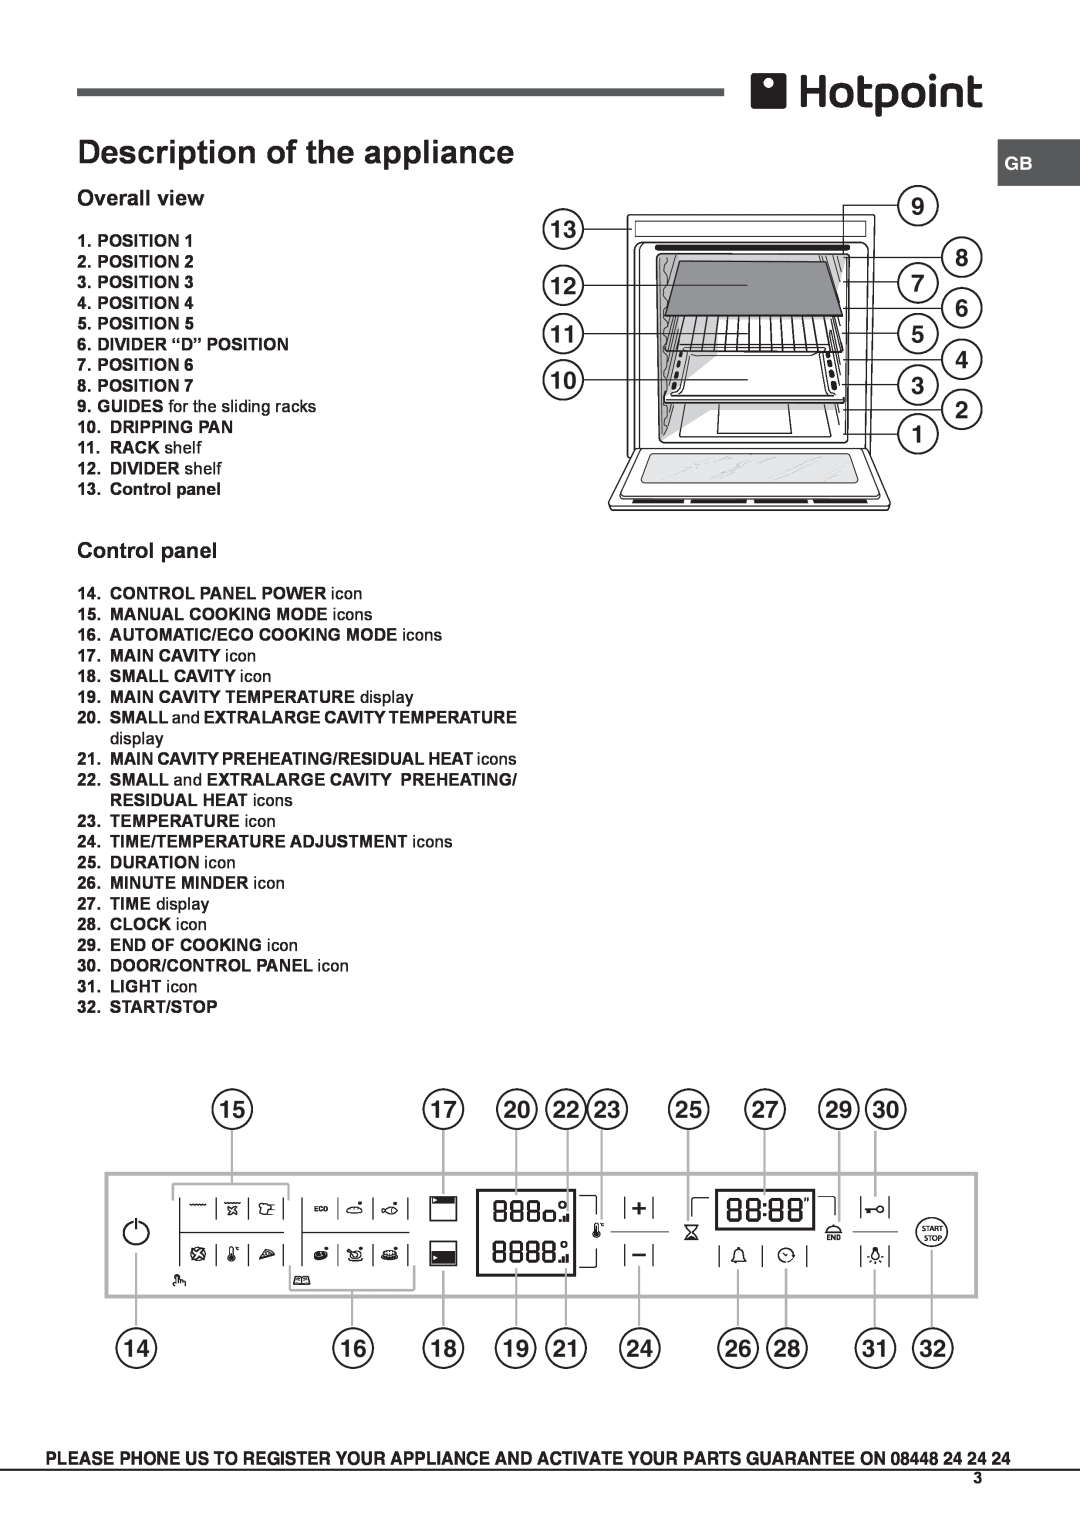 Hotpoint osx 1036s nd cx, osx 1036n dcx s manual Description of the appliance, Overall view, Control panel 